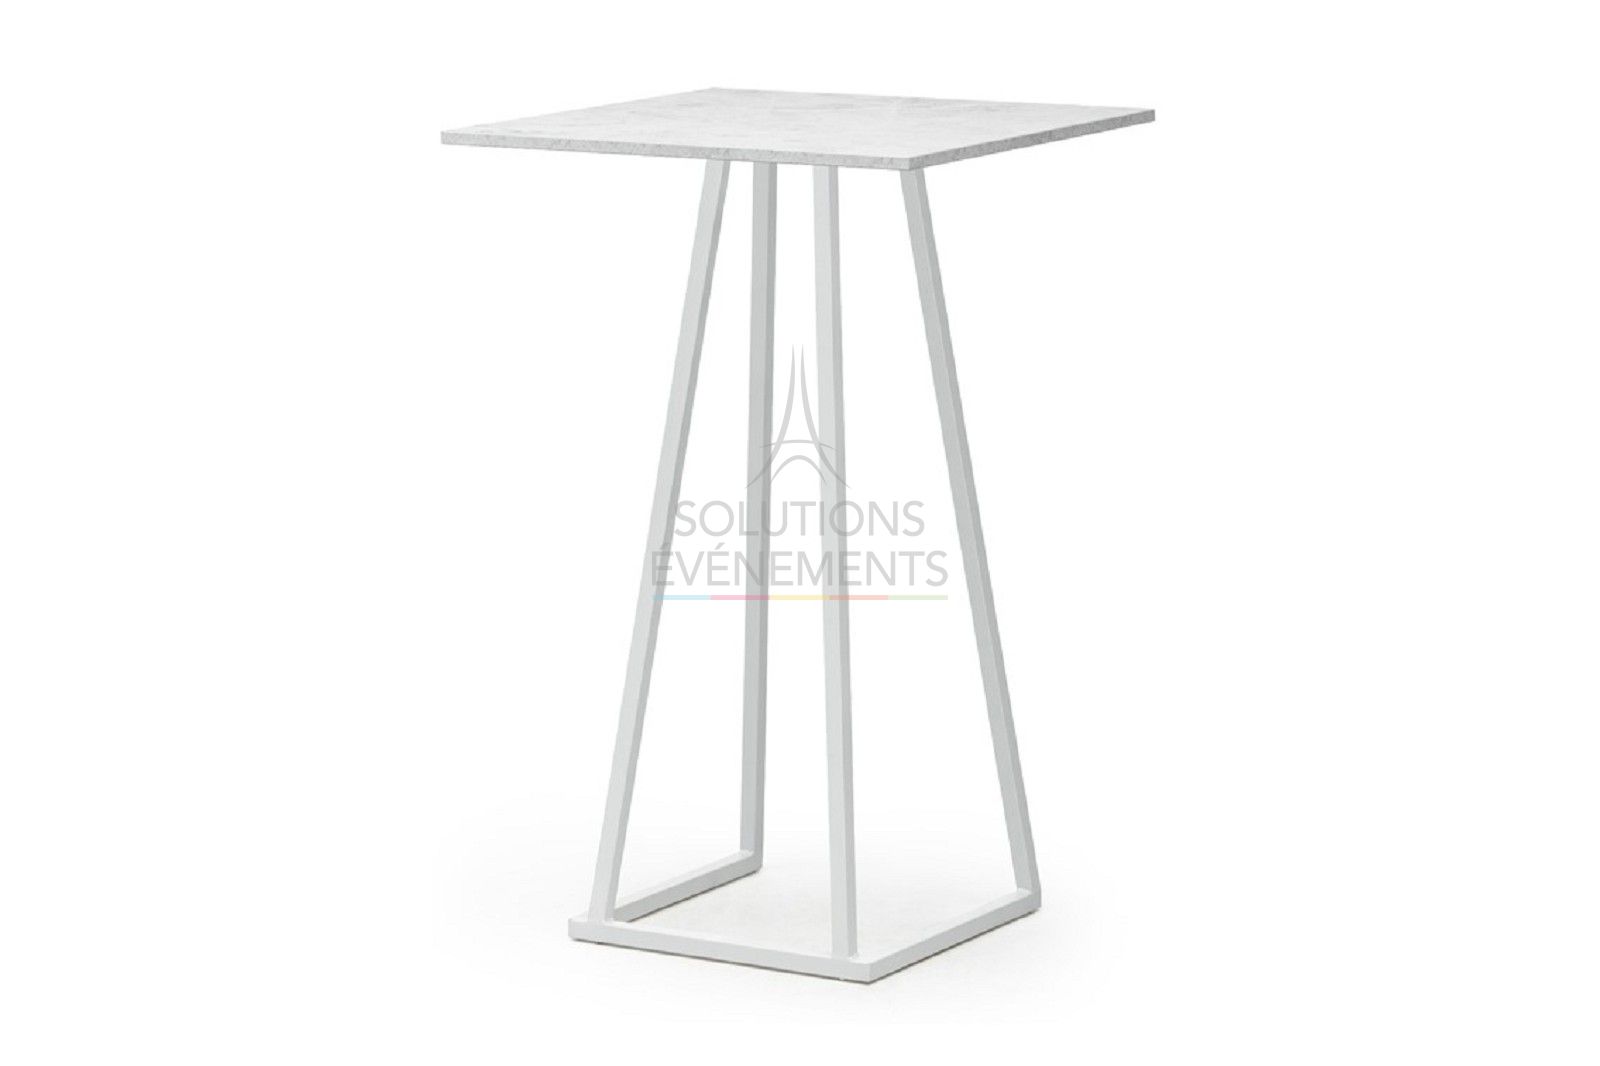 Rental of white high table with square white marble top.